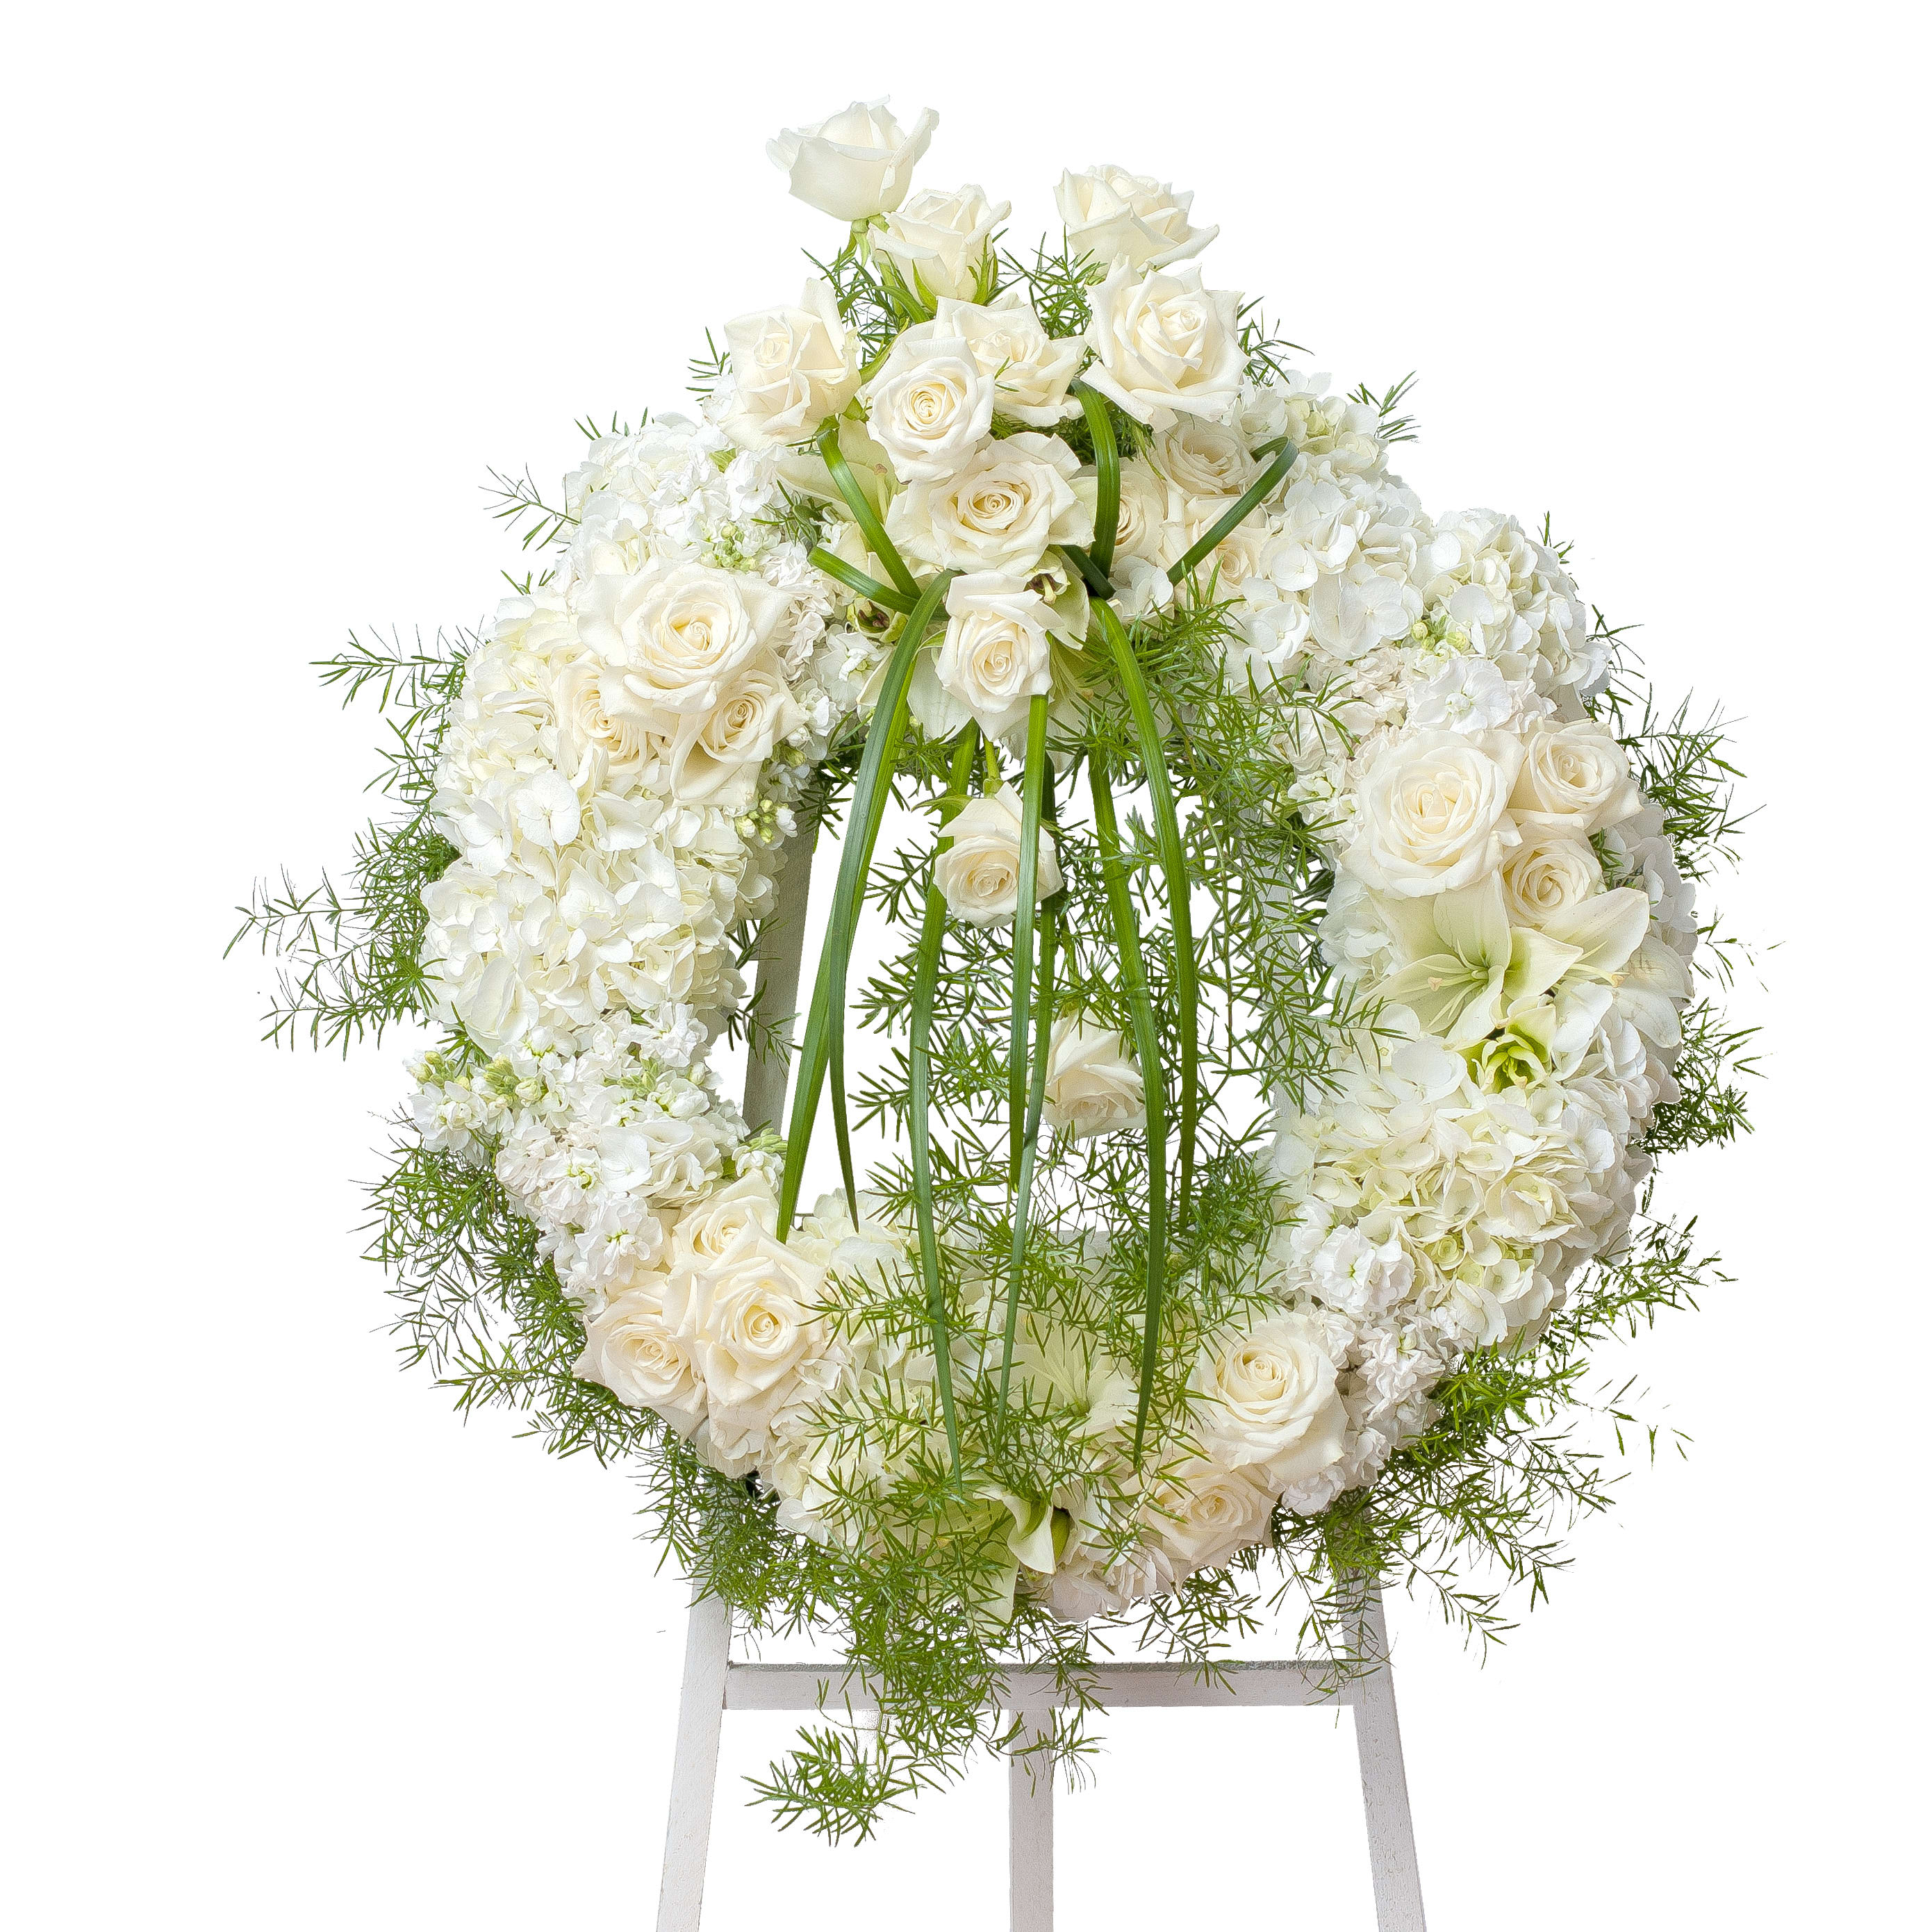 Elegant Wreath - A combination of cream and white blooms in this wreath makes a beautiful elegant setting.